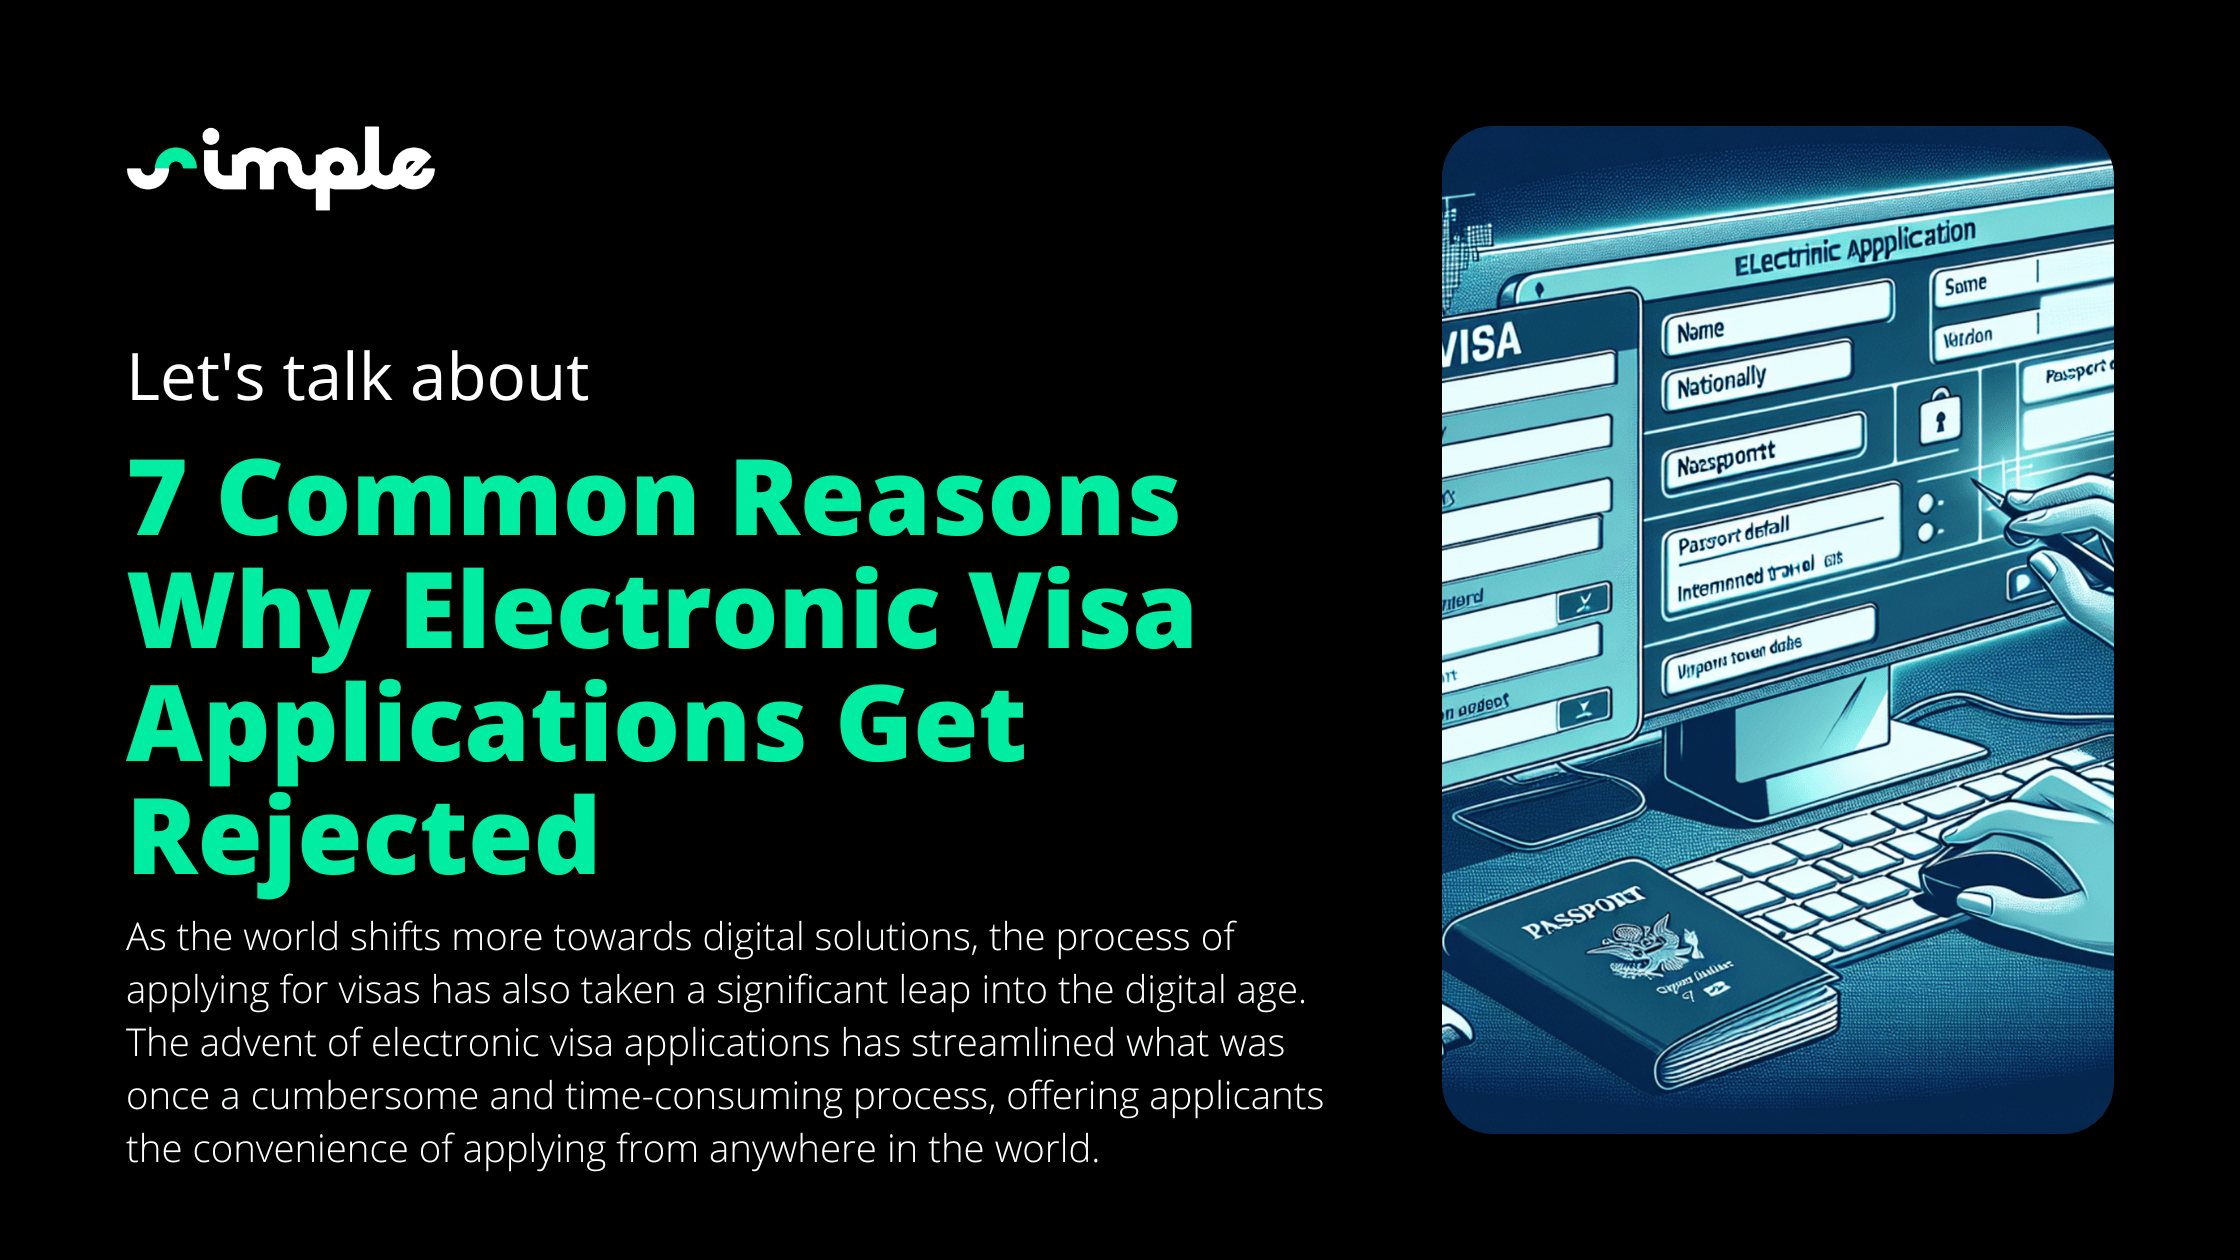 7 Common Reasons Why Electronic Visa Applications Get Rejected